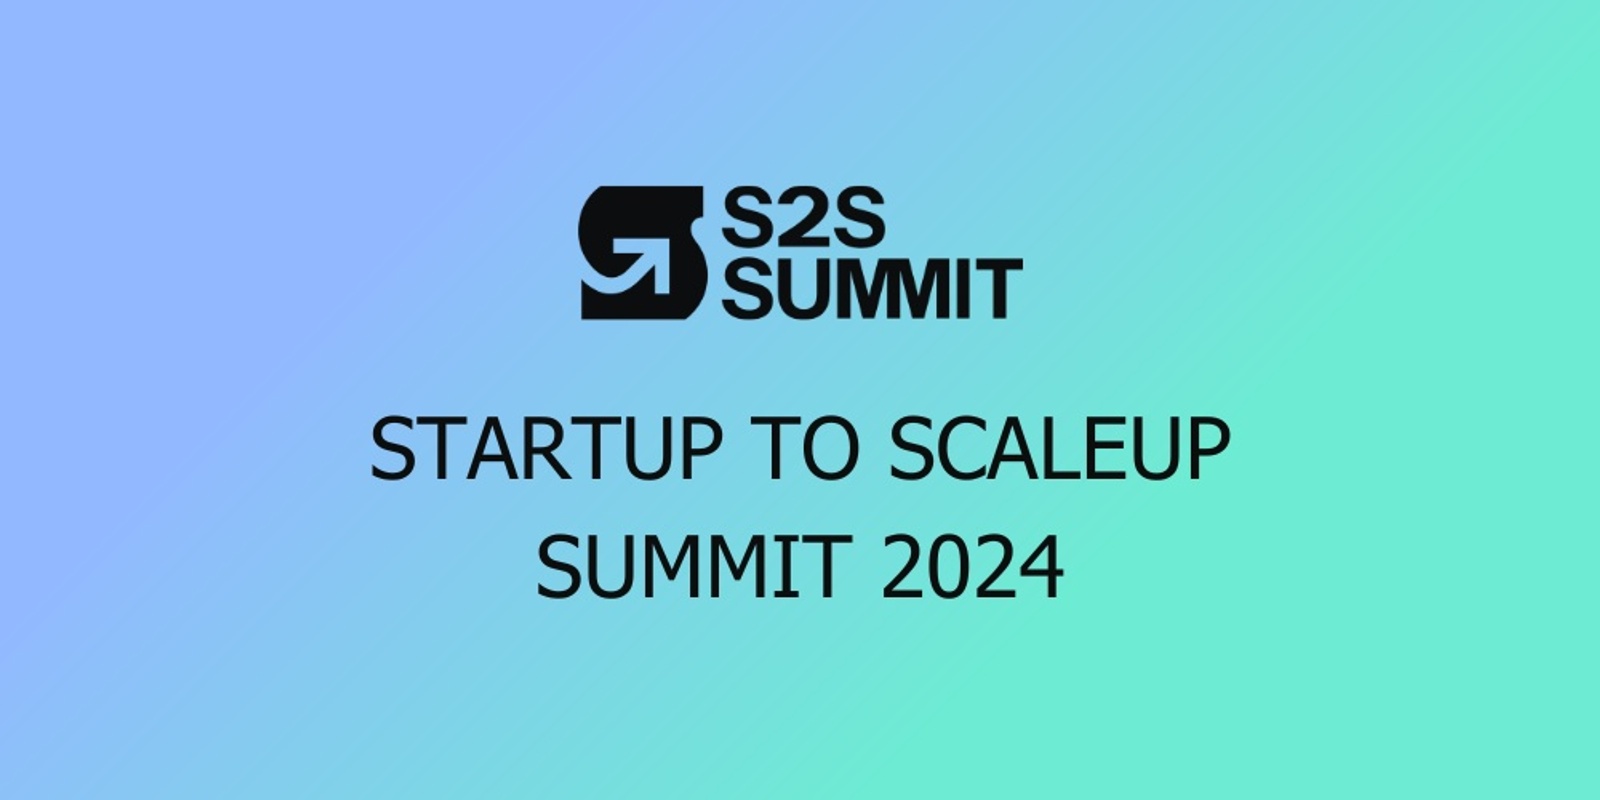 Banner image for Startup to Scaleup Summit 2024